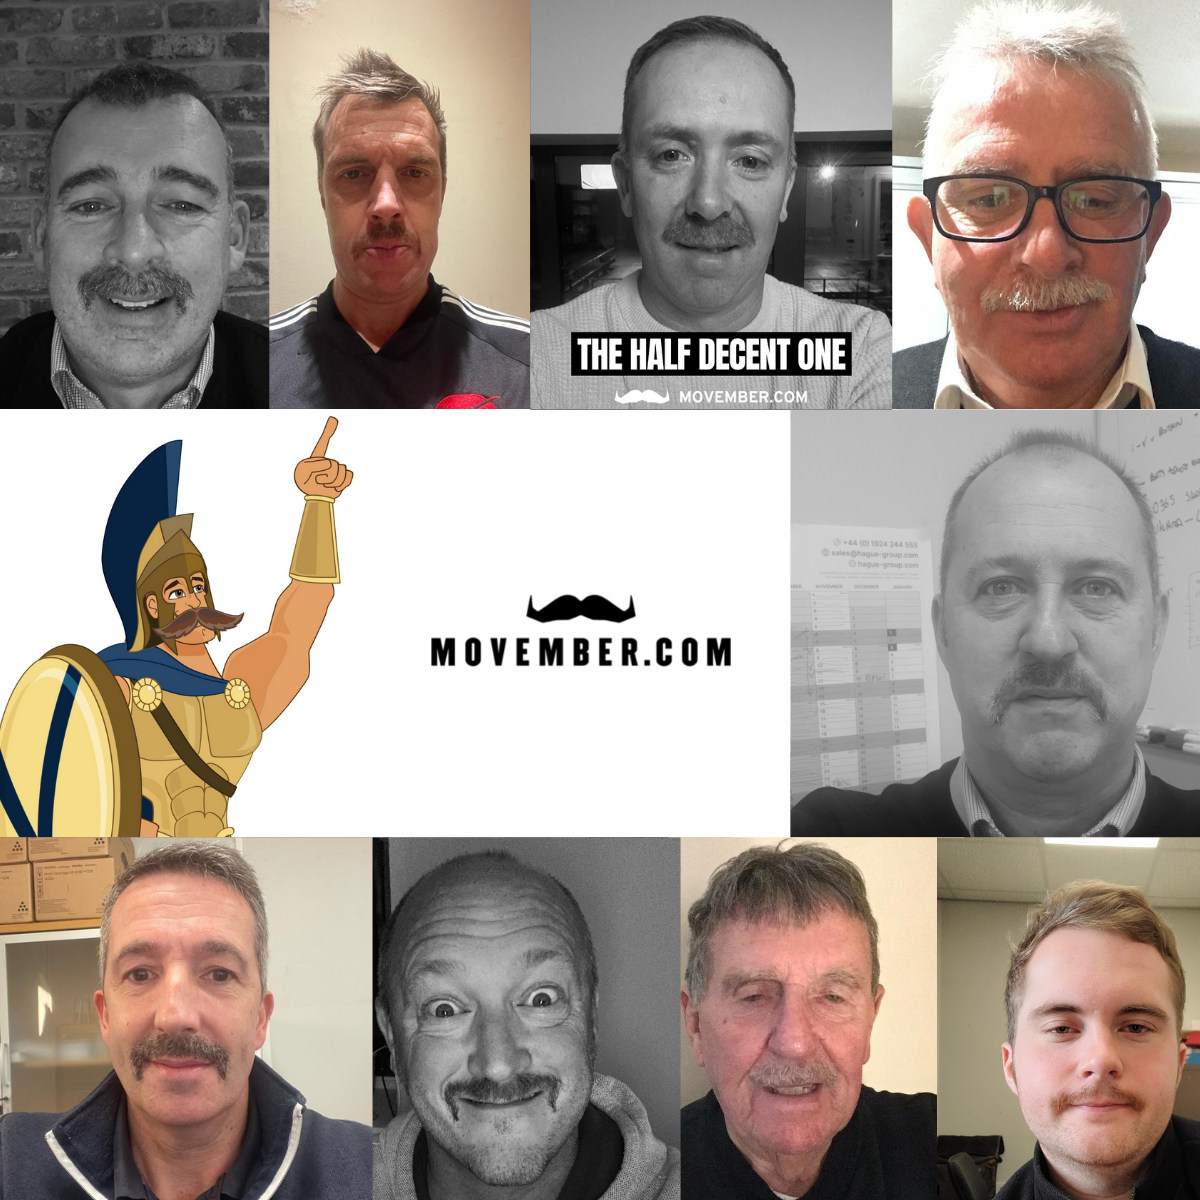 We are taking part in Movember 2021